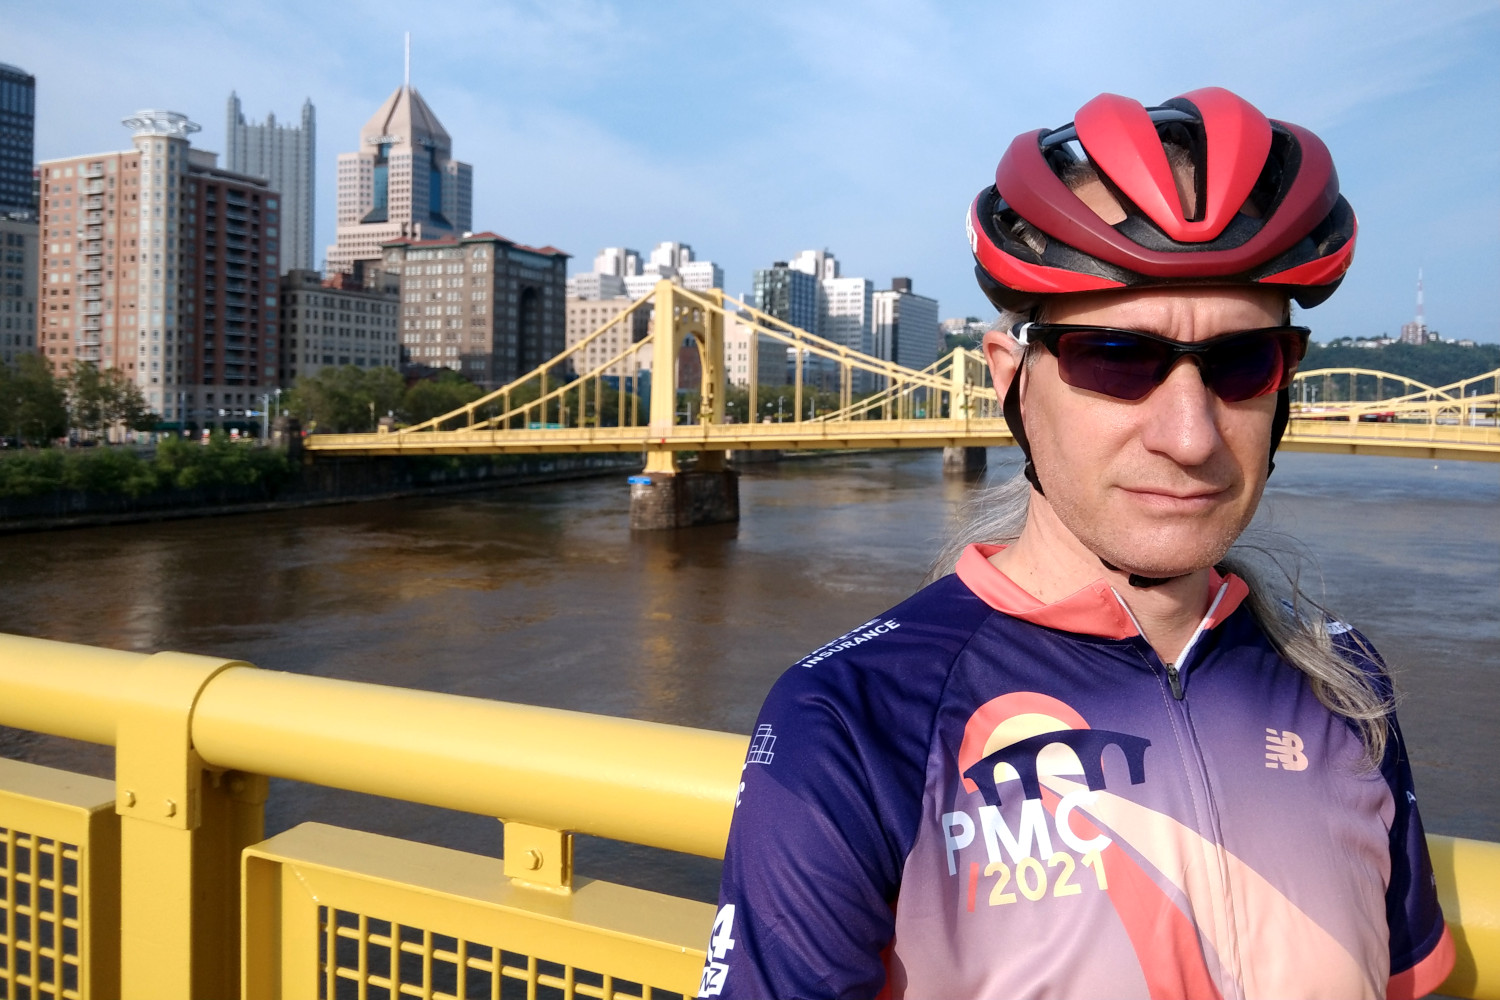 Modeling the 2021 PMC jersey in downtown Pittsburgh.